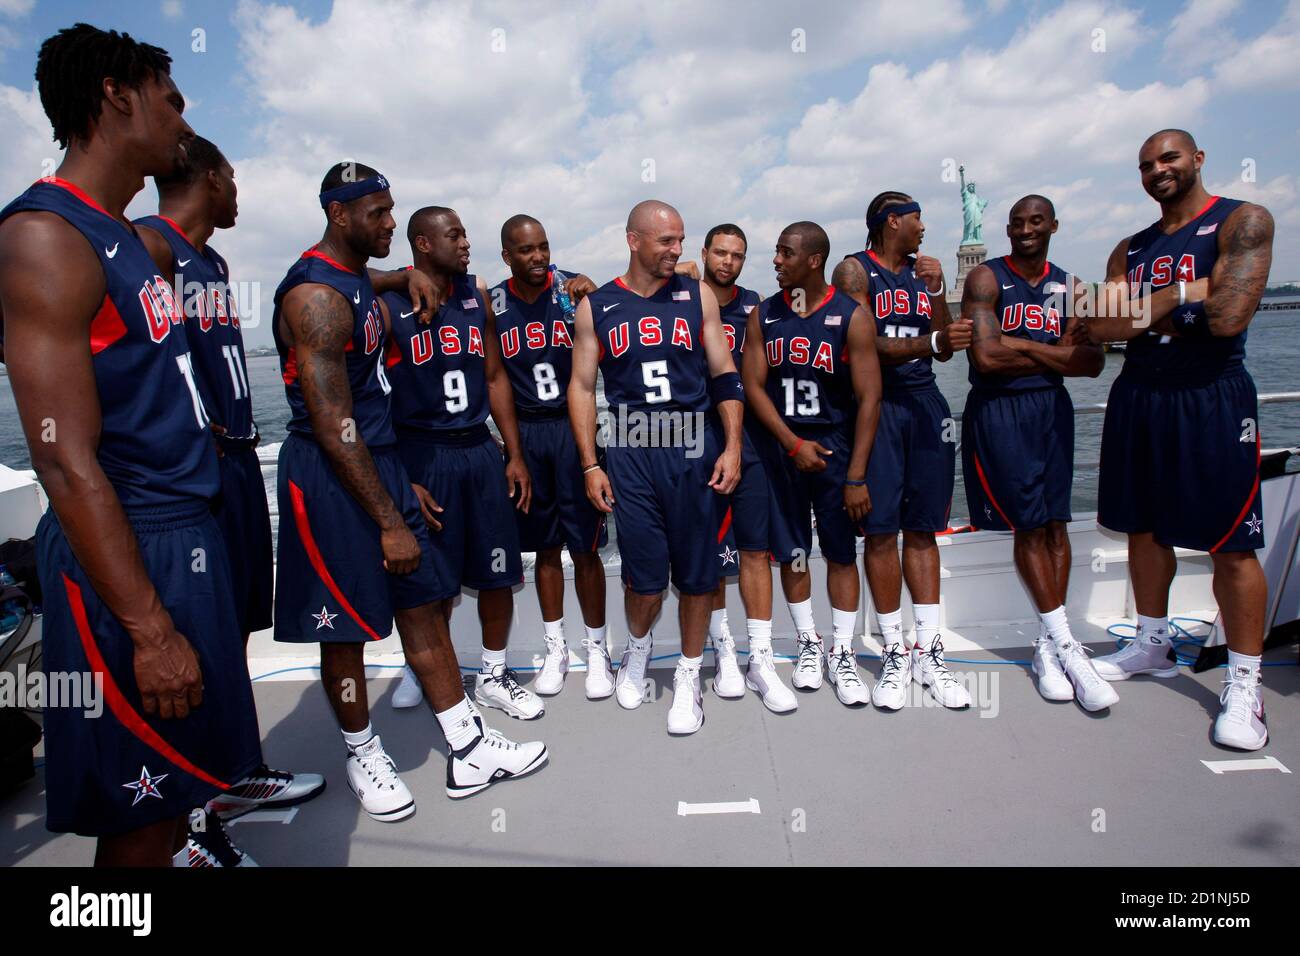 The U S Men S Olympic Basketball Team Pauses For Photographs As They Stand In Their Official Uniforms On The Top Deck Of A Tour Boat Near The Statue Of Liberty During A Promotional